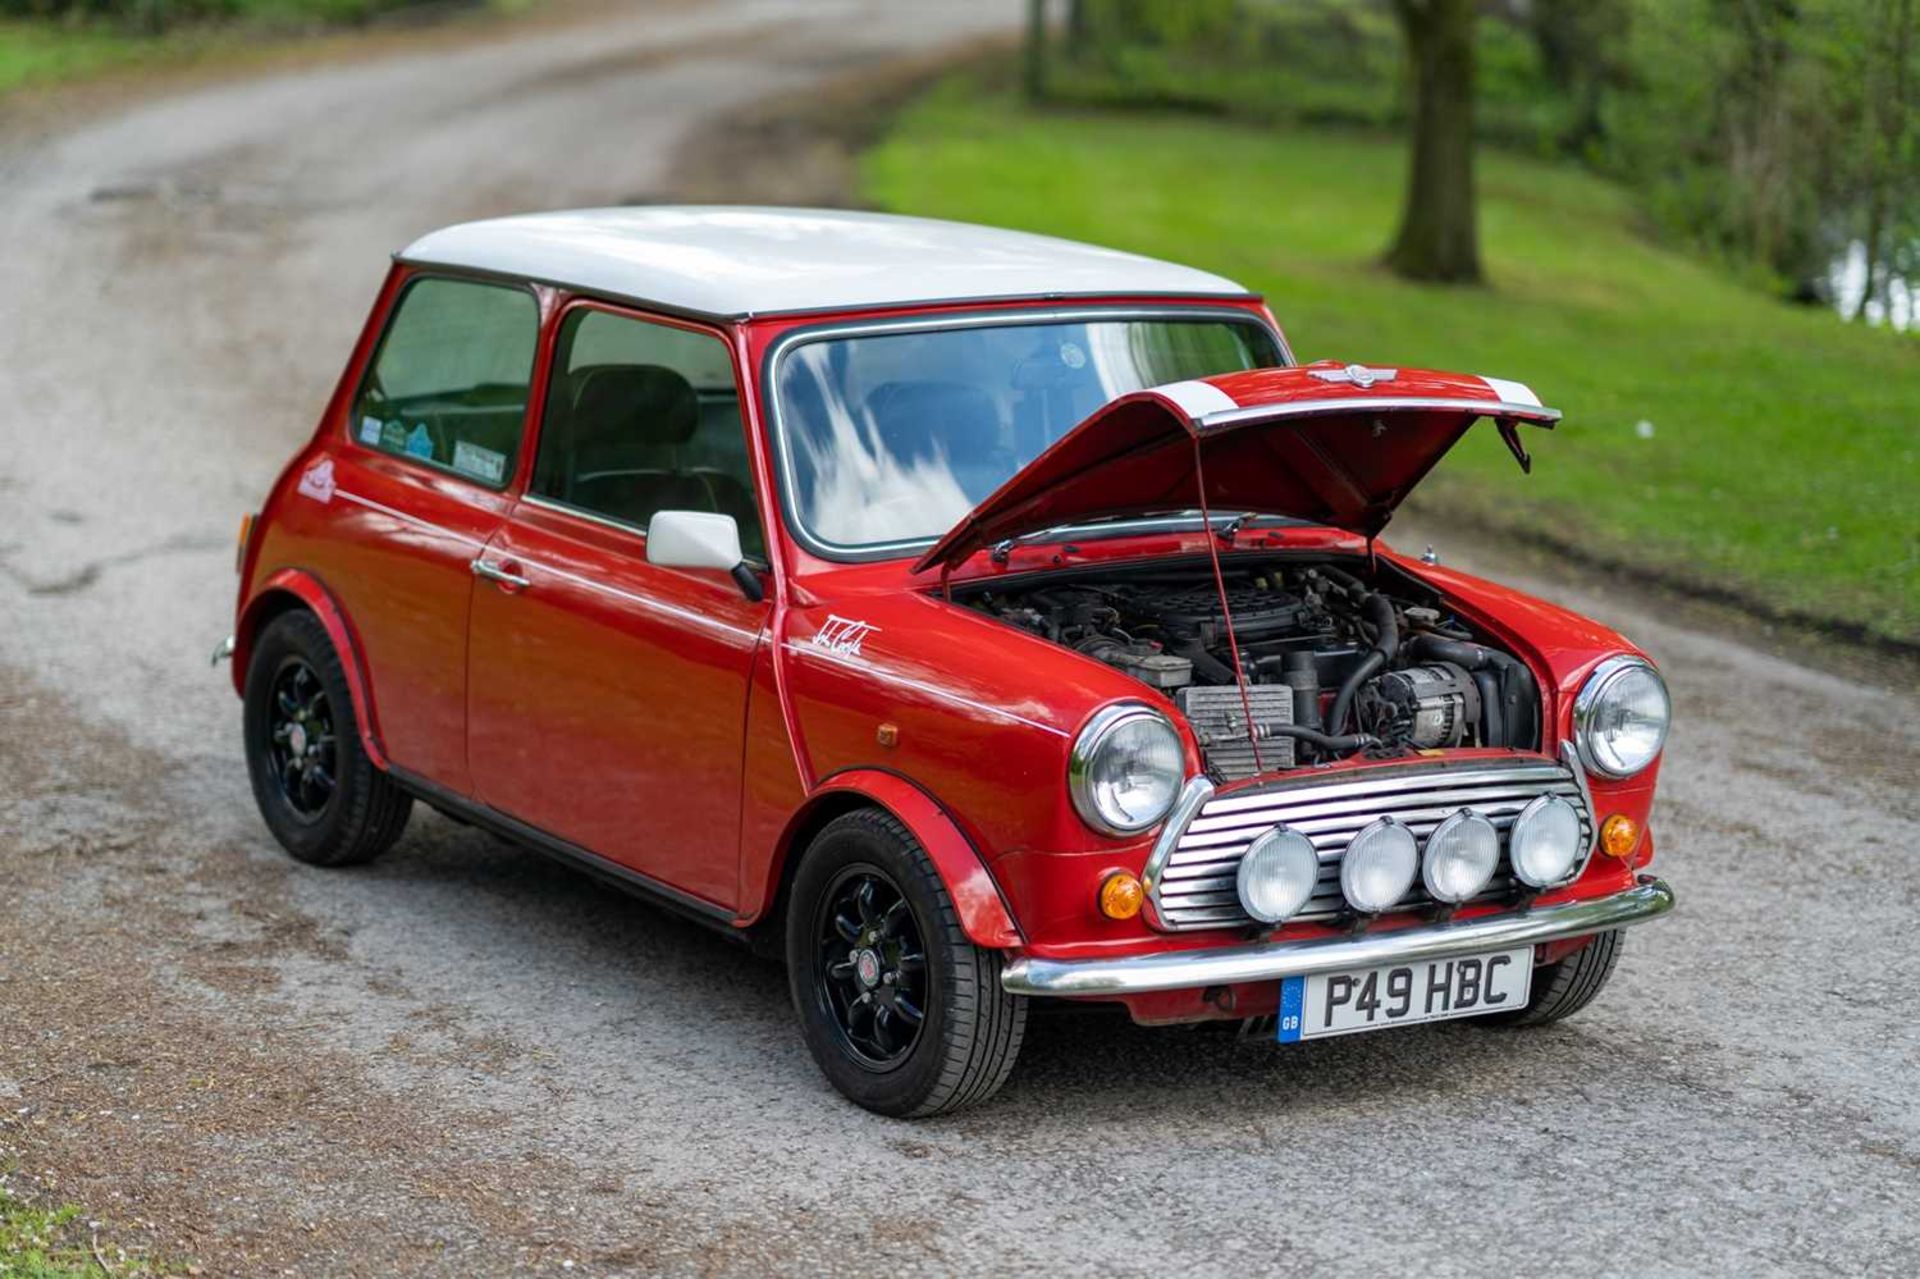 1996 Rover Mini Cooper - 35th Anniversary Edition Factory fitted air conditioning  - Image 12 of 58